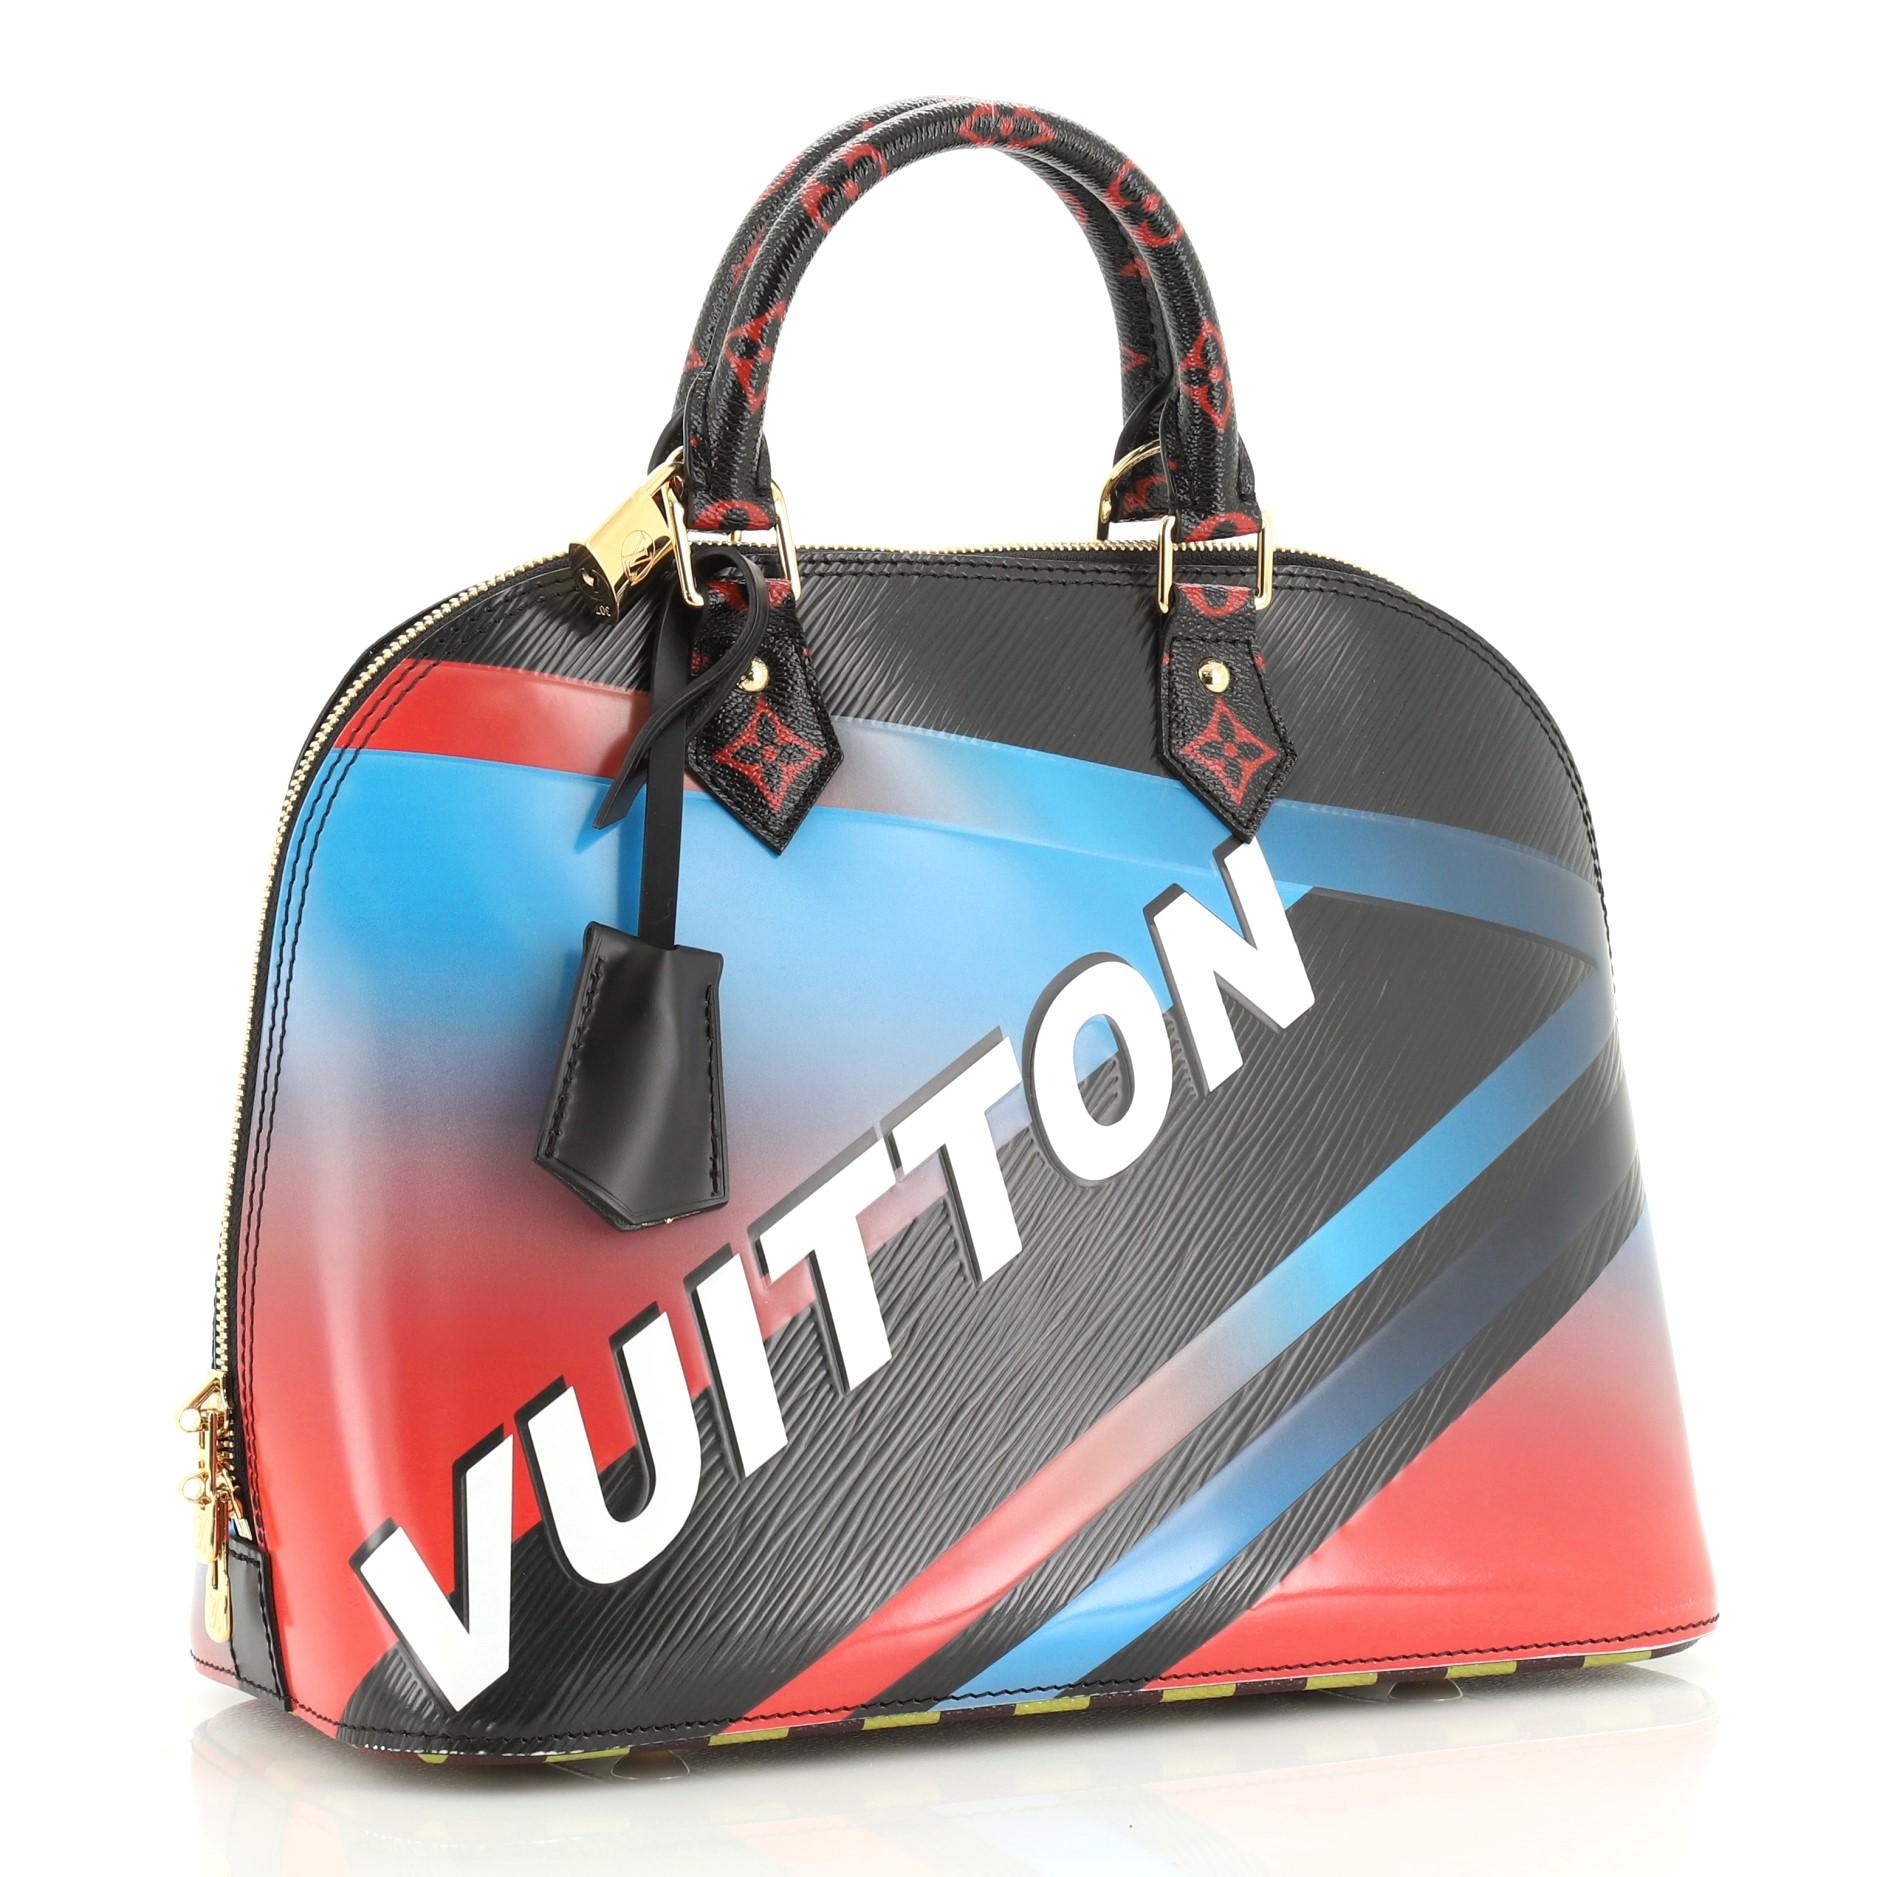 This Louis Vuitton Alma Handbag Limited Edition Race Epi Leather PM, crafted from multicolor epi leather, features dual rolled handles and gold-tone hardware. Its two-way zip closure opens to a black microfiber interior with a slip pocket.